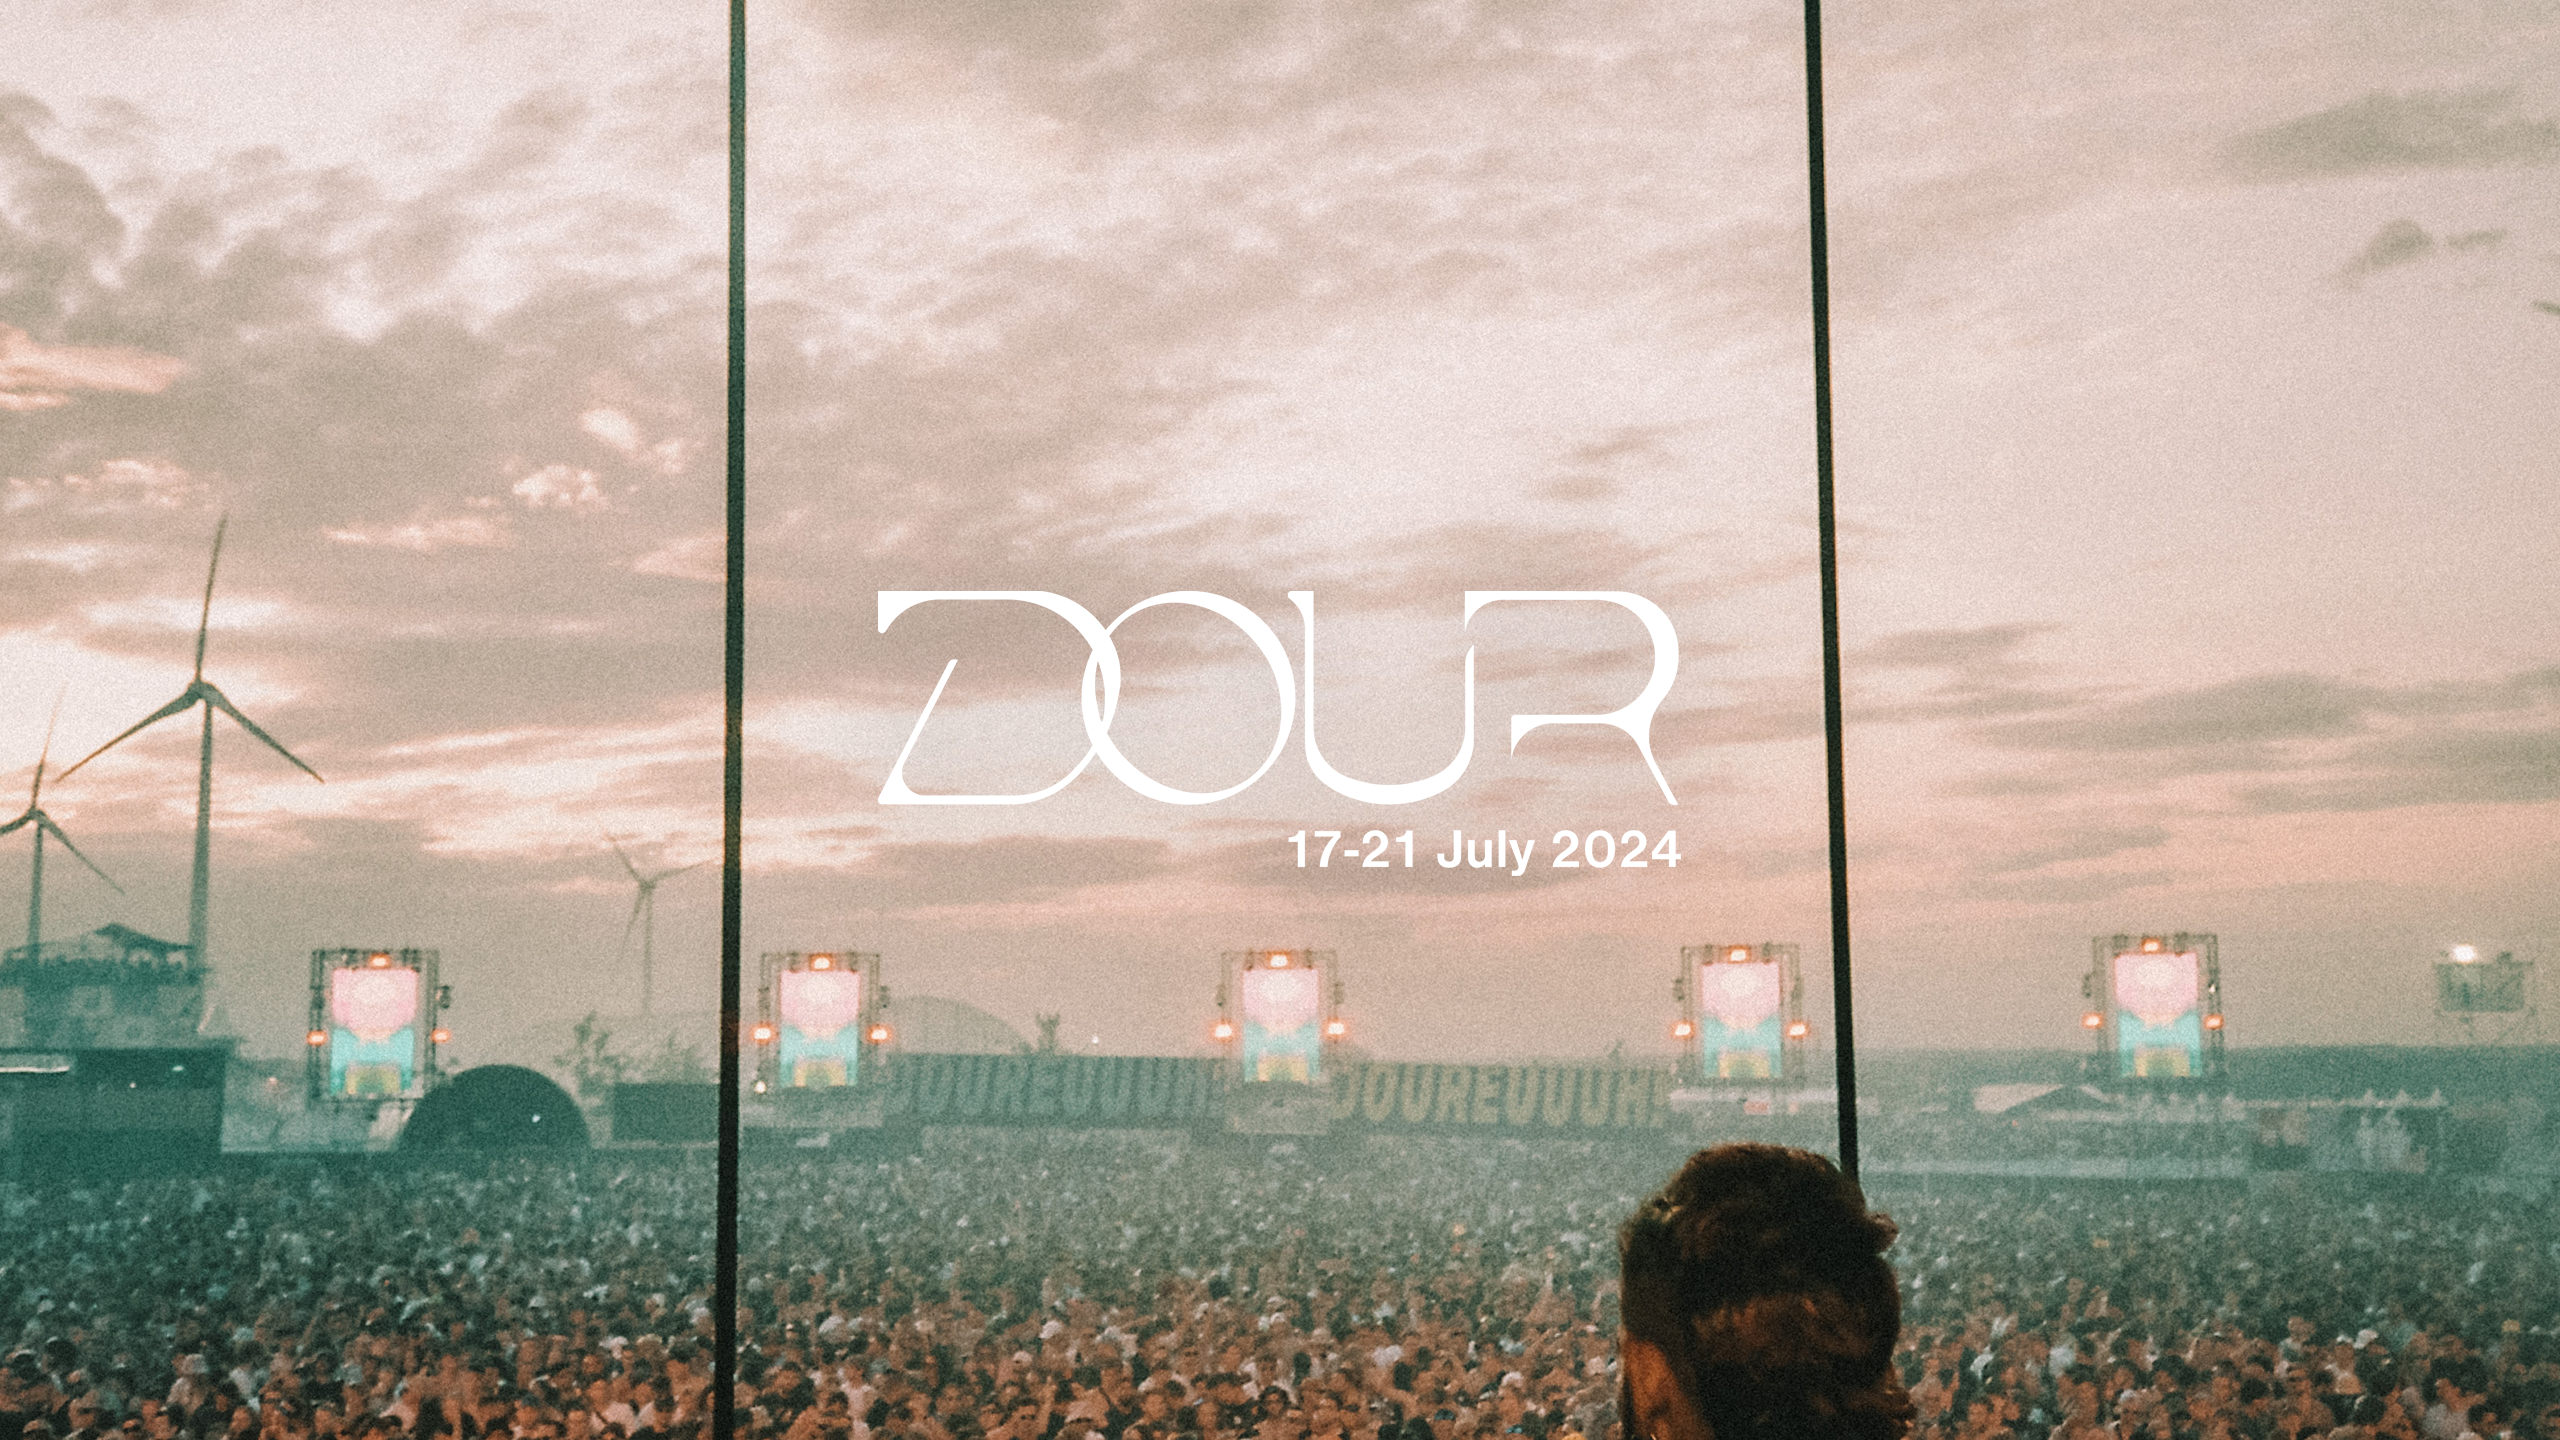 Dour Festival 2024 - Day 2 - フライヤー表